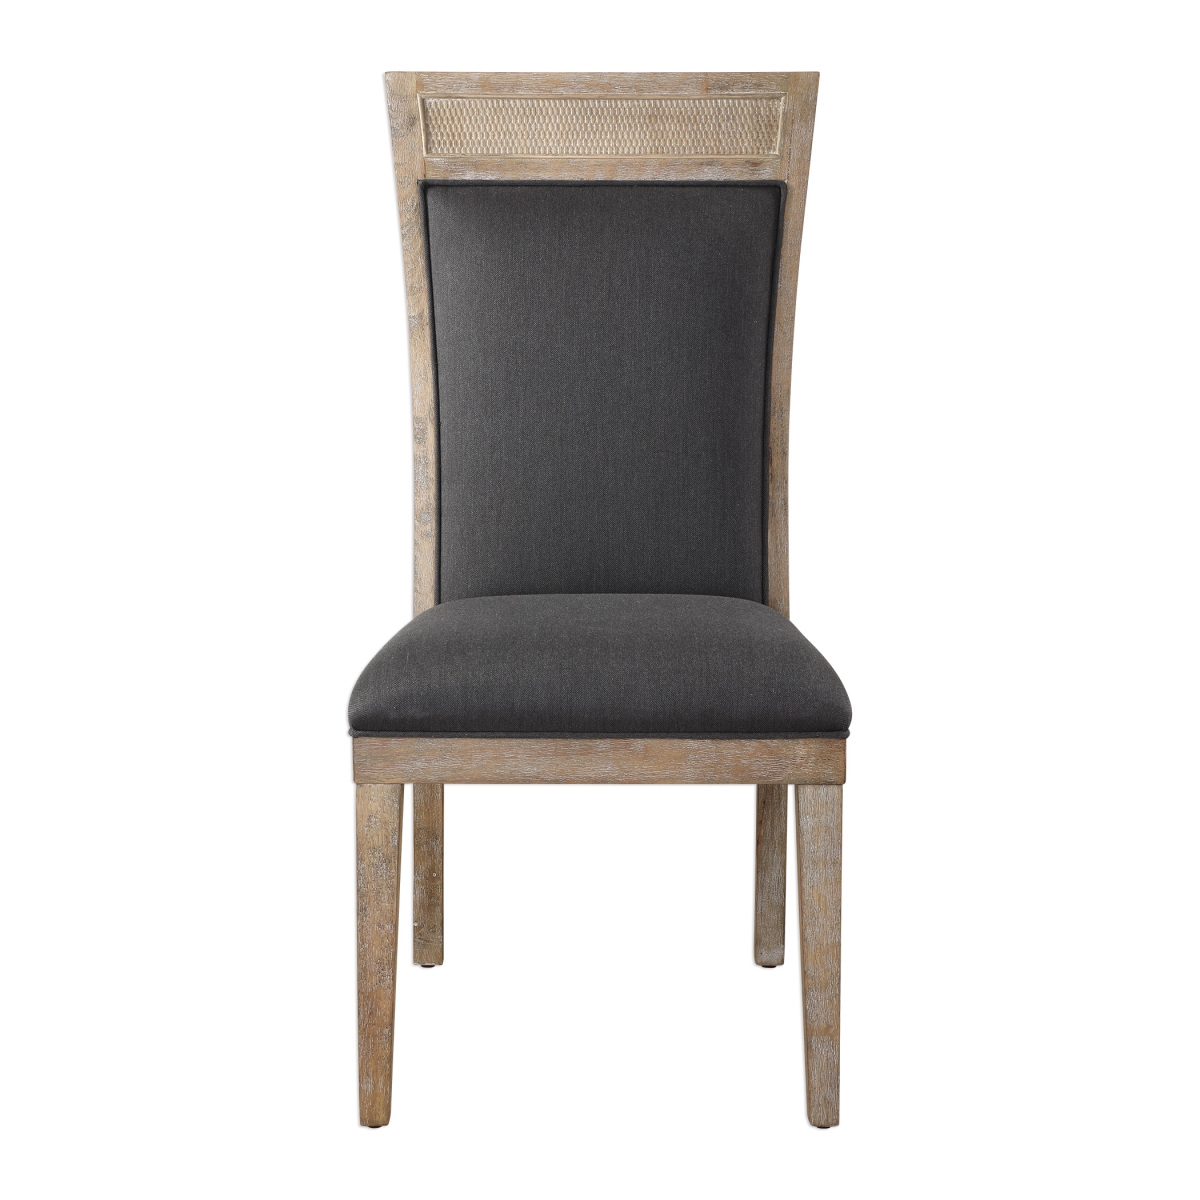 Picture of 212 Main 23440 Encore Dark Gray Armless Chair